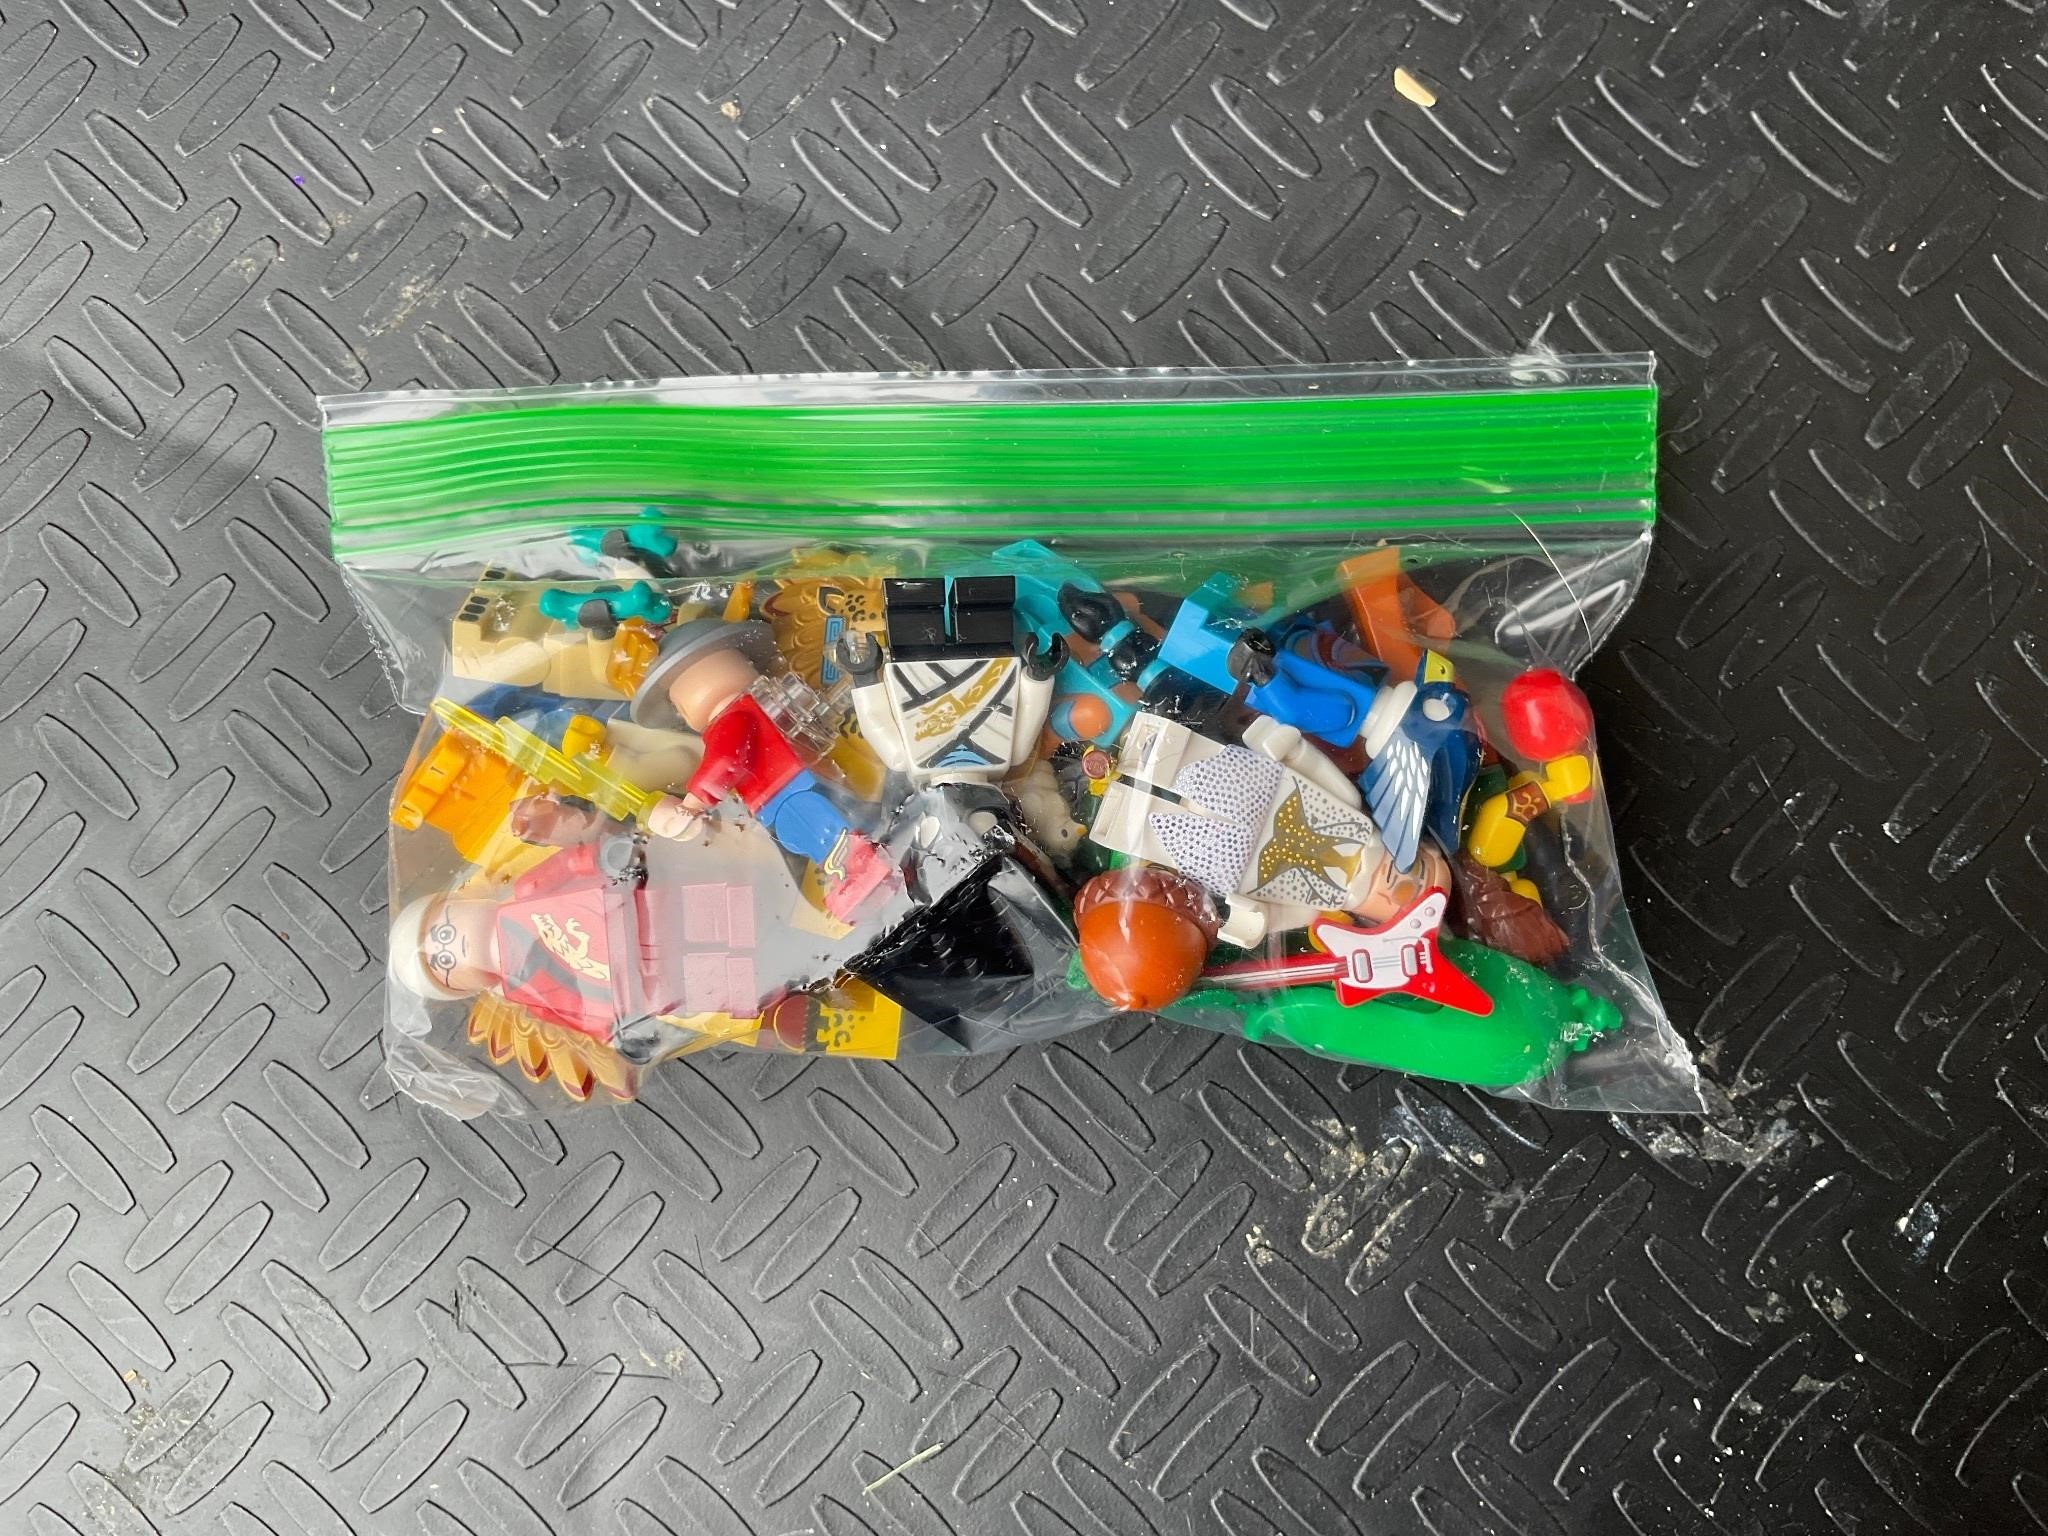 Snack size bag of Lego figurines